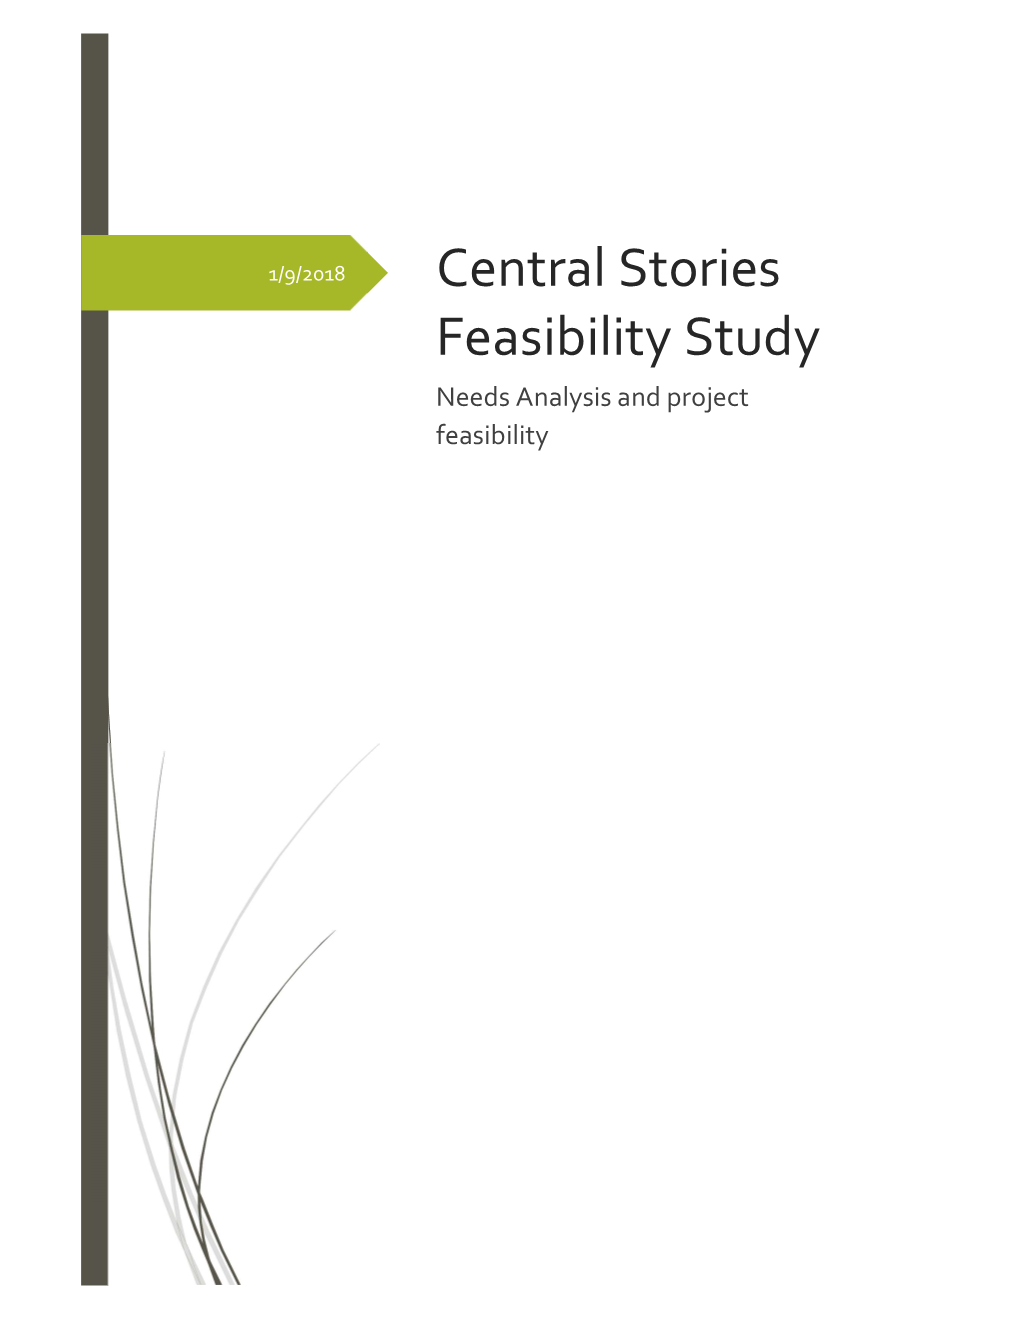 Central Stories Feasibility Study